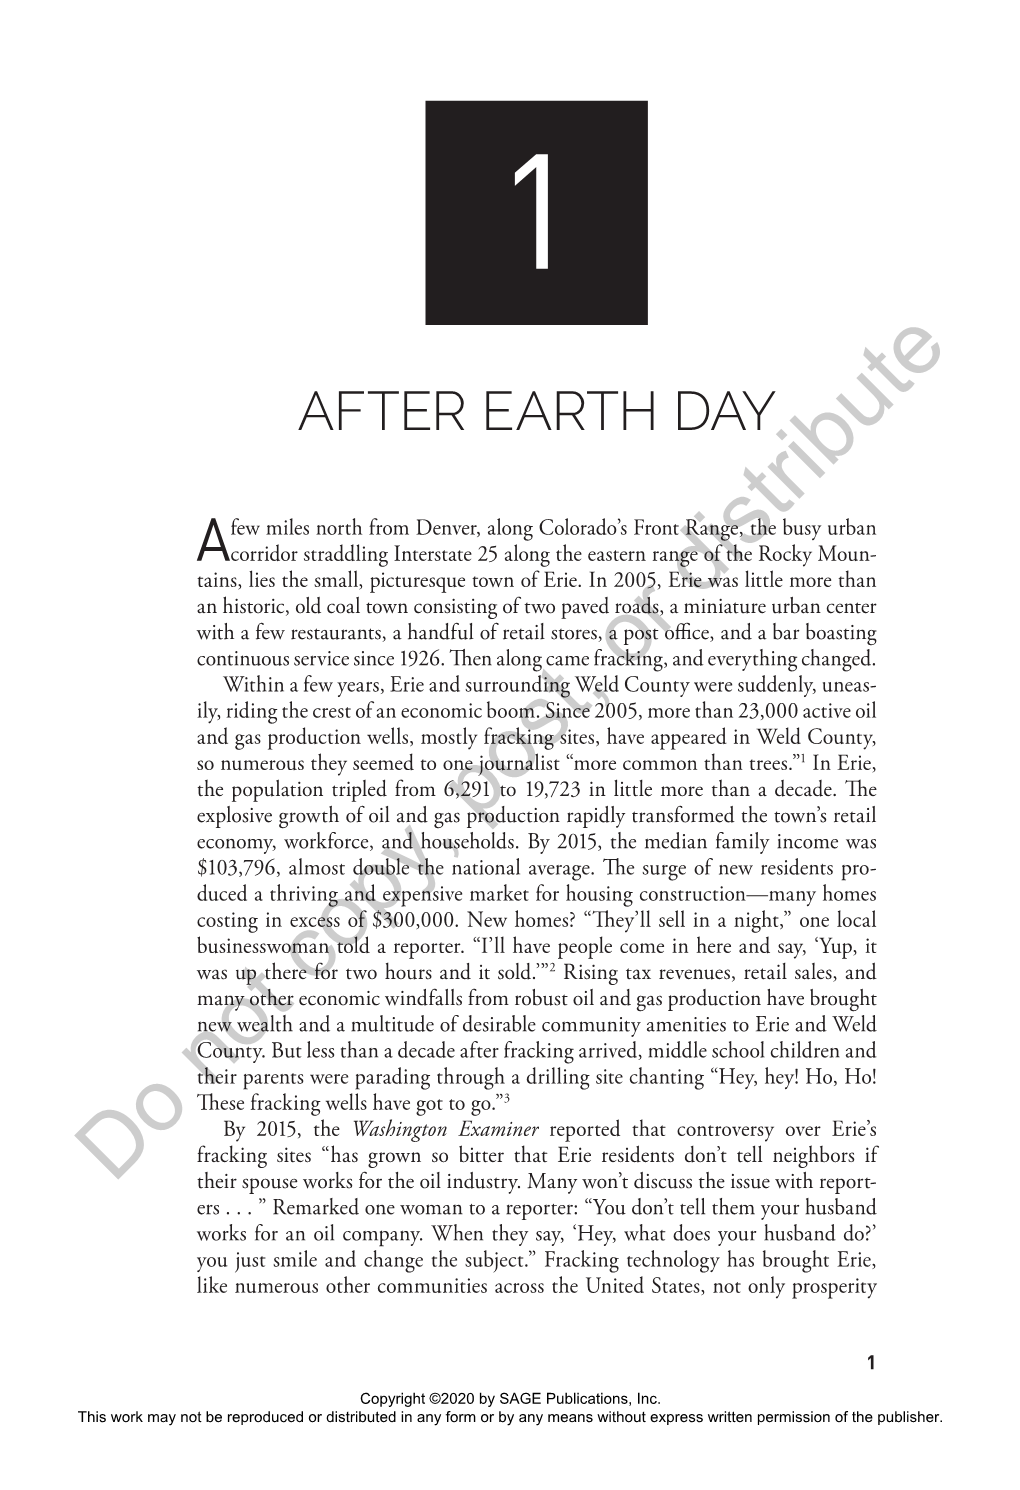 After Earth Day